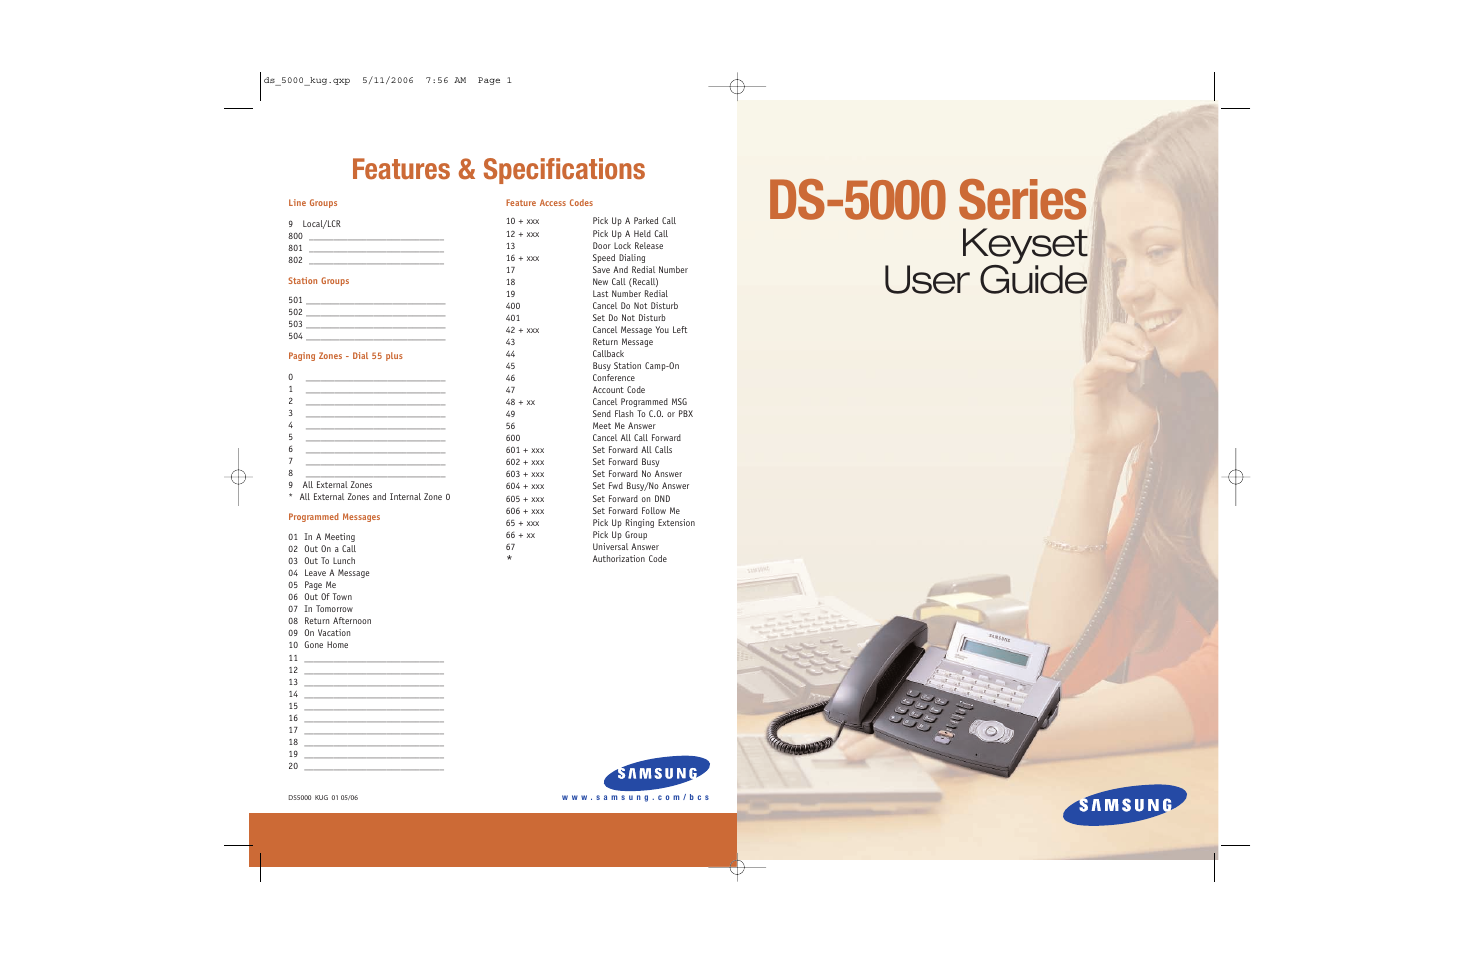 Ds-5000 series, Keyset user guide, Features & specifications | Samsung DS-5000 User Manual | Page 88 / 88